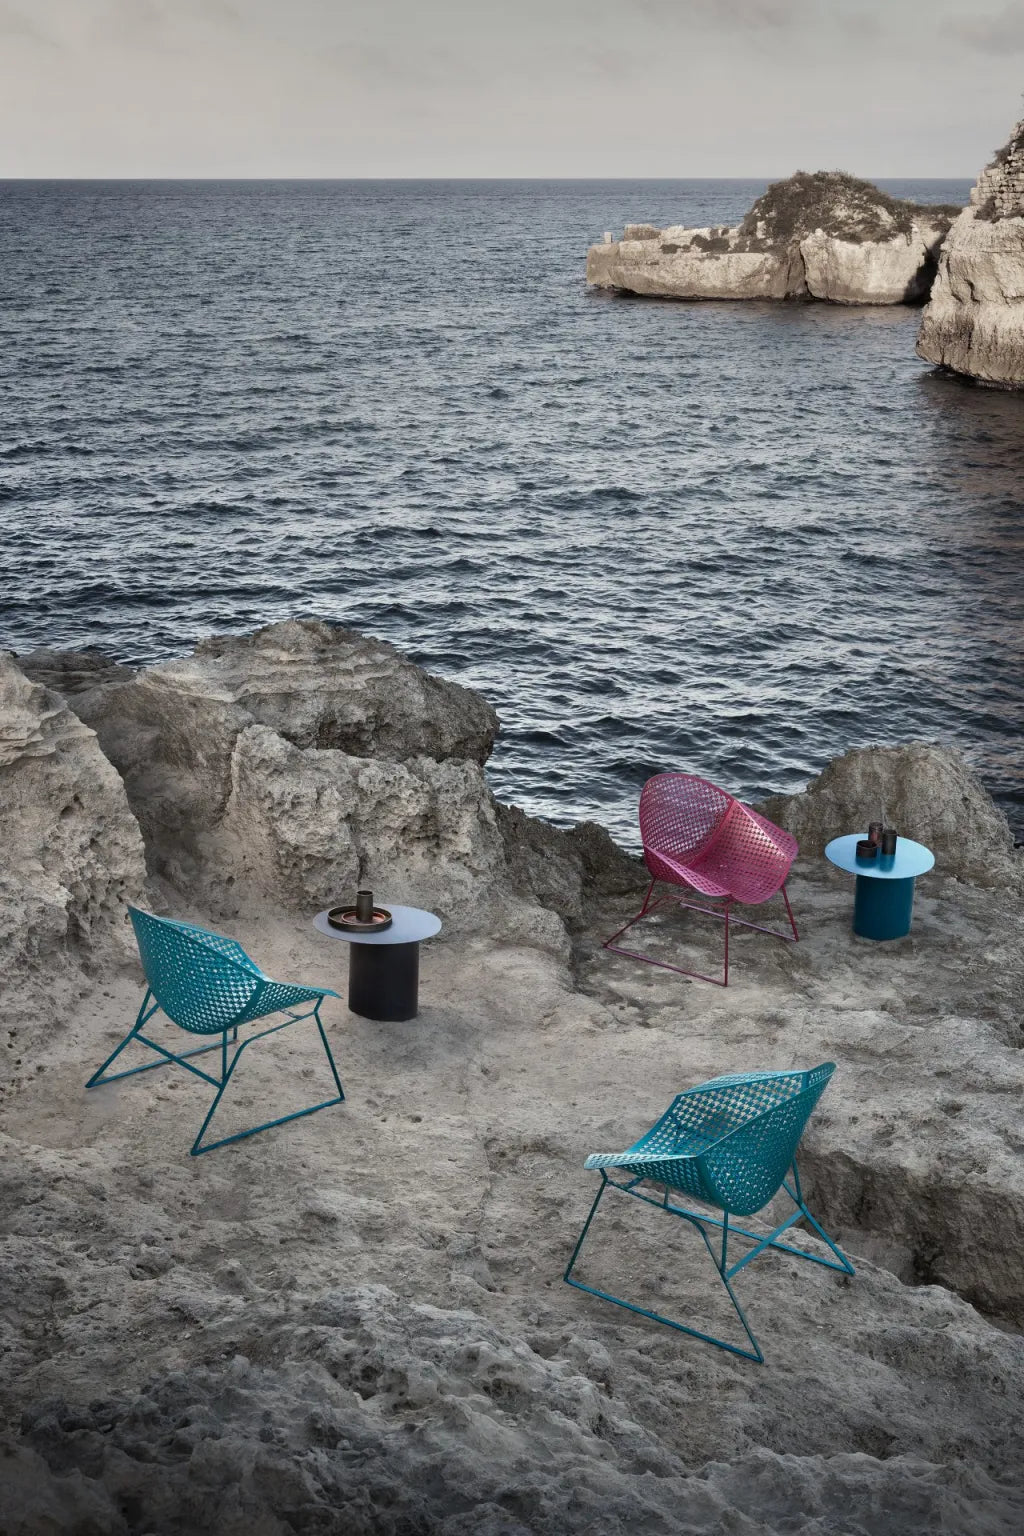 HEN LOUNGE CHAIR BY DAA - start from $4,050